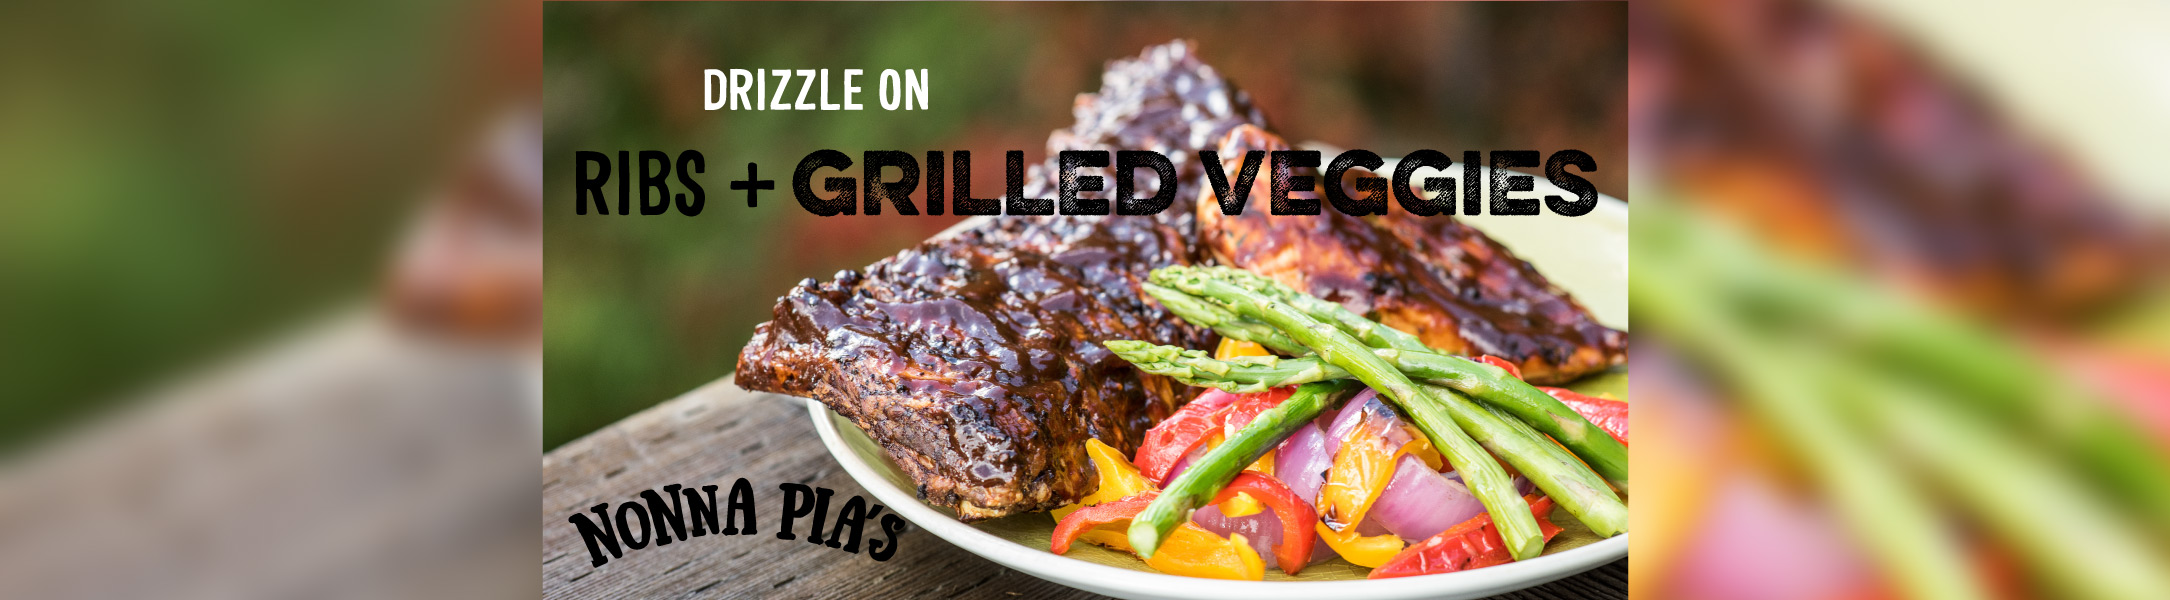 grilled veggies and ribs